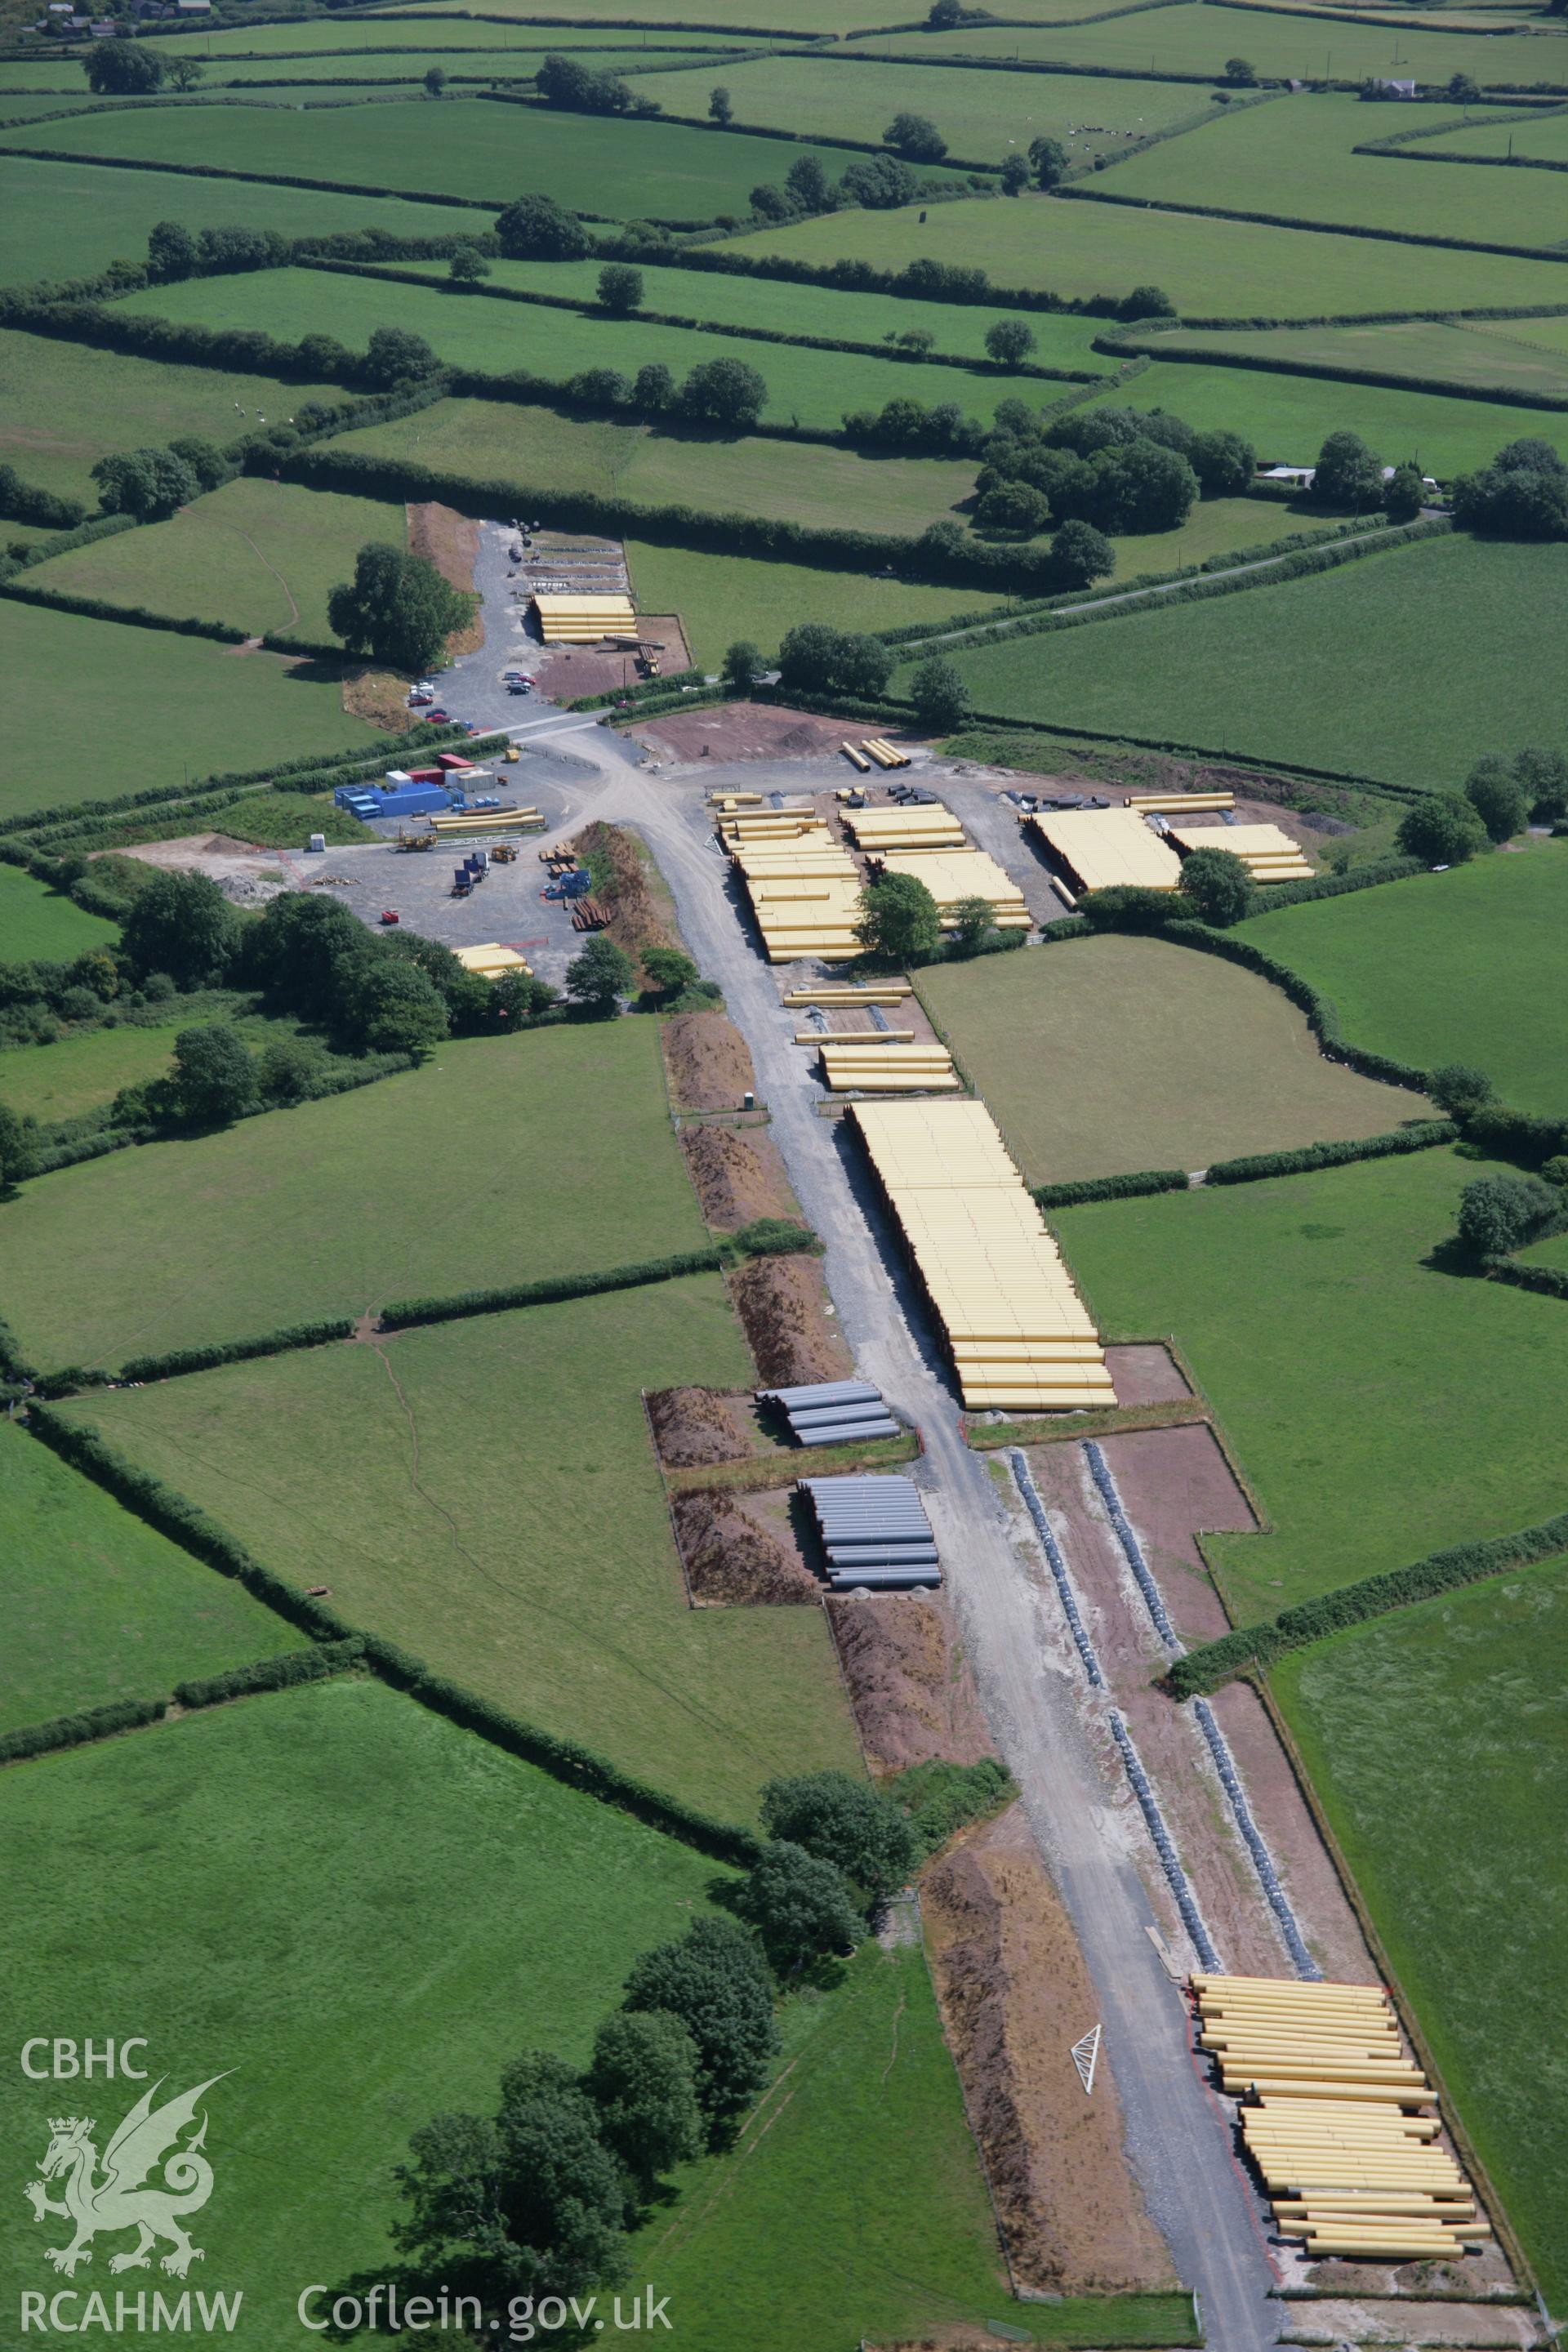 RCAHMW colour oblique aerial photograph of gas pipeline depot. Taken on 24 July 2006 by Toby Driver